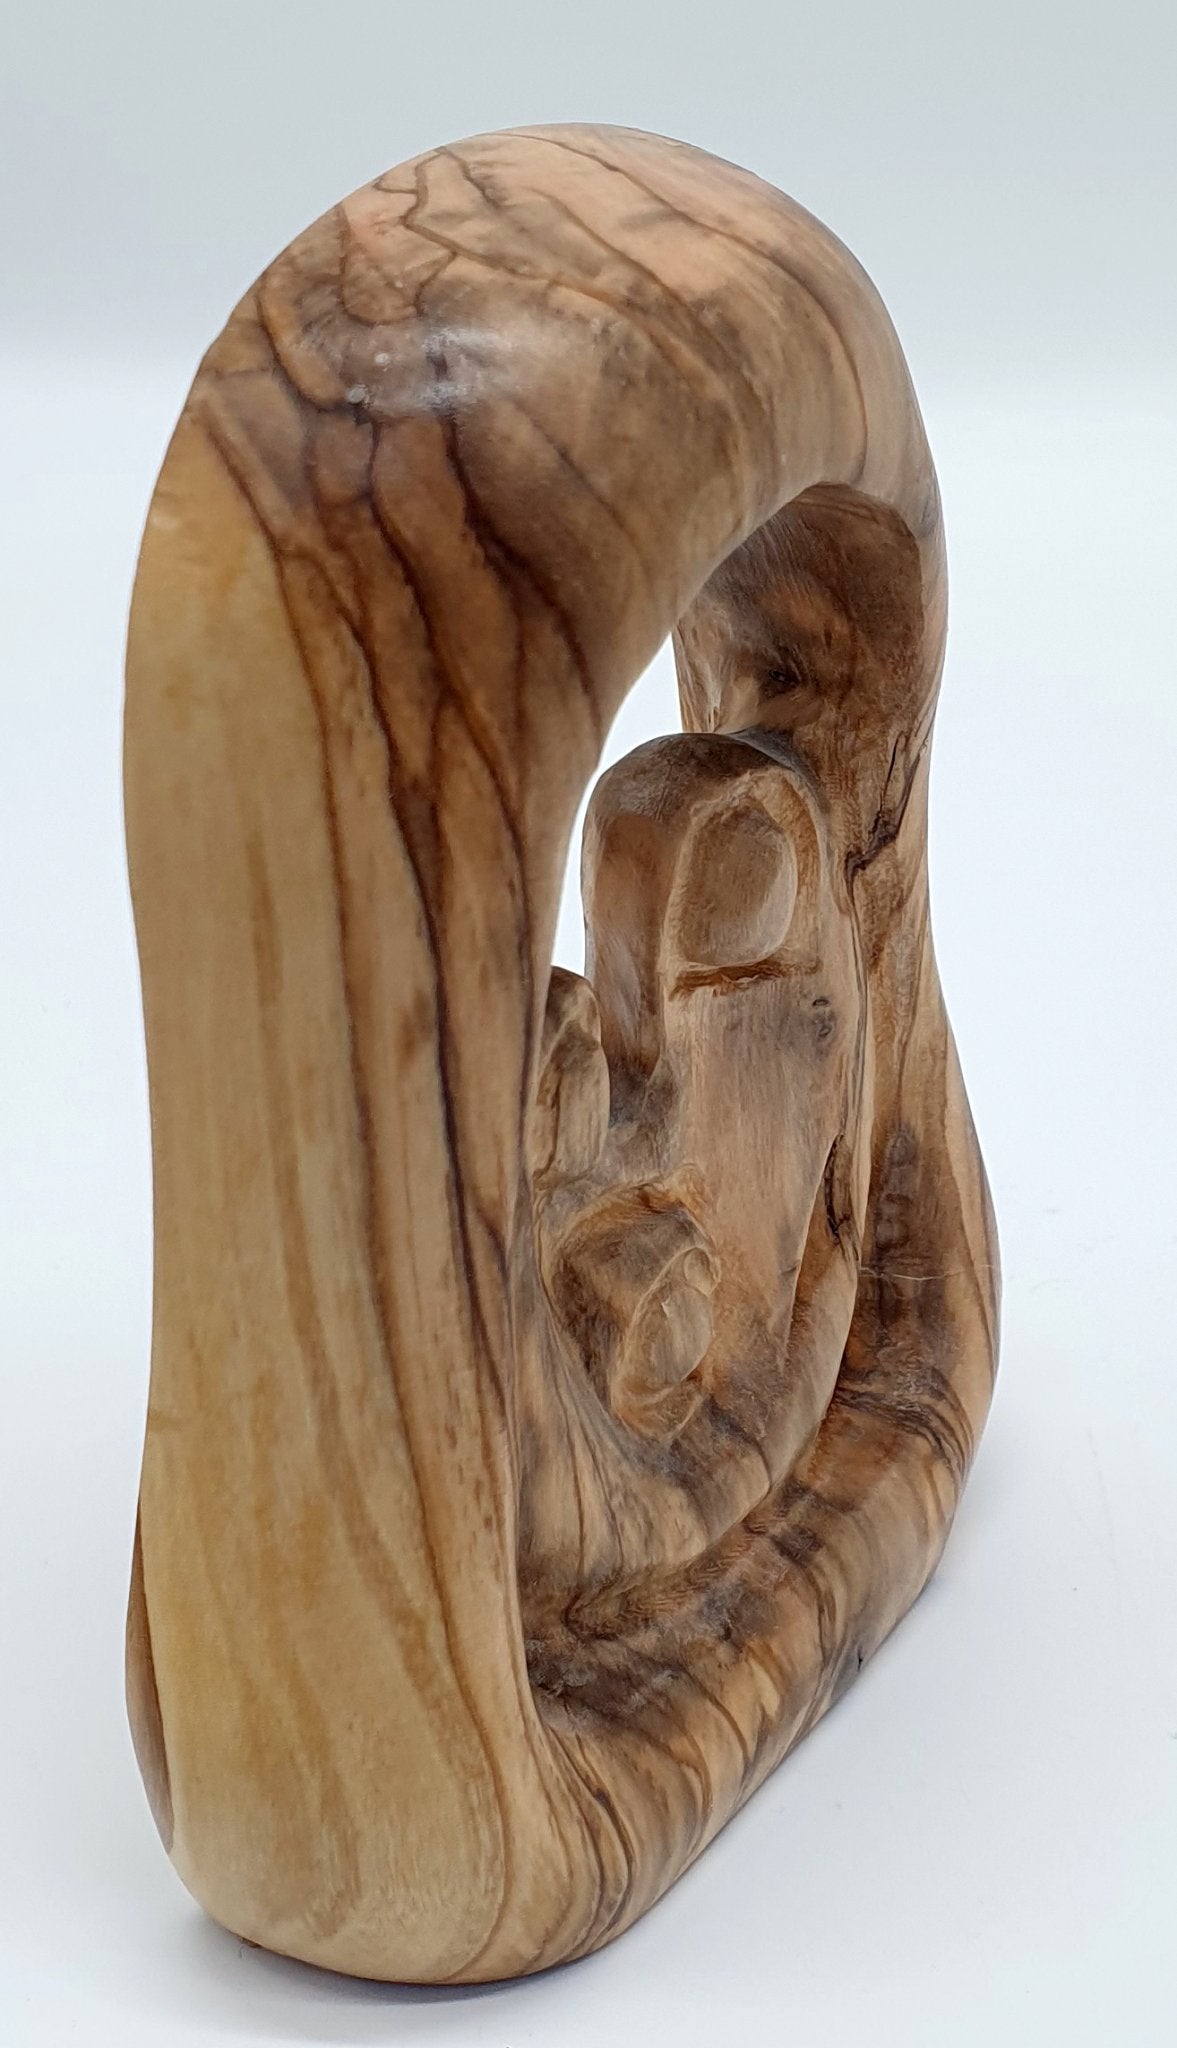 Bethlehem Crafted Olive Wood Religious Art, Small Nativity Figurine, Unique Holy Family Sculpture." - Zuluf